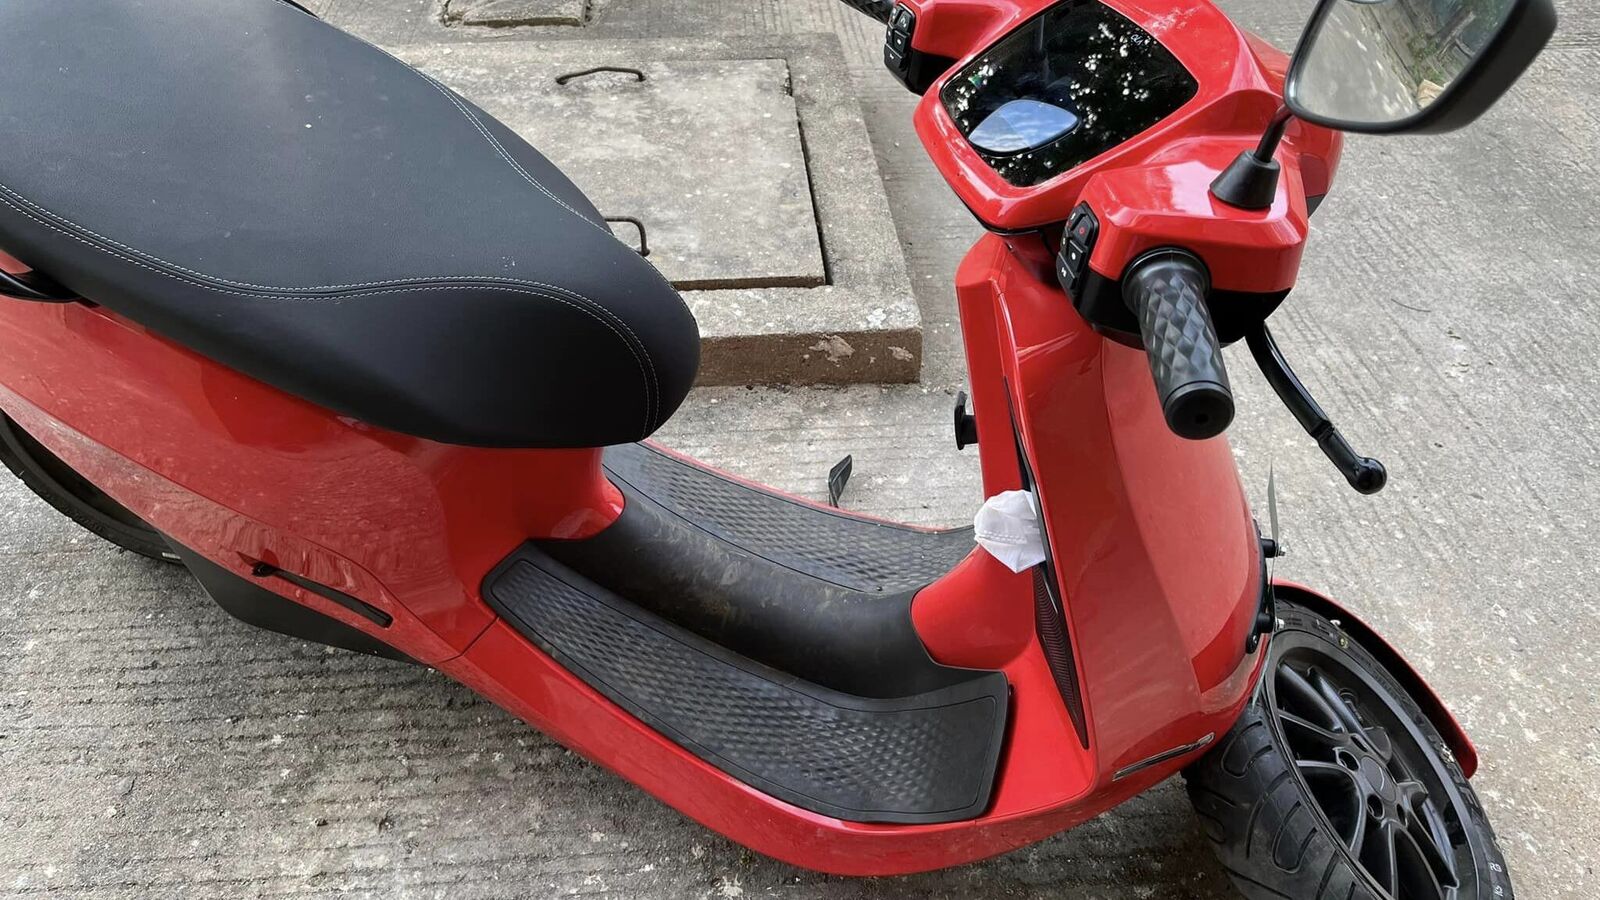 Ola S1 Pro electric scooter's front suspension breaks soon after delivery